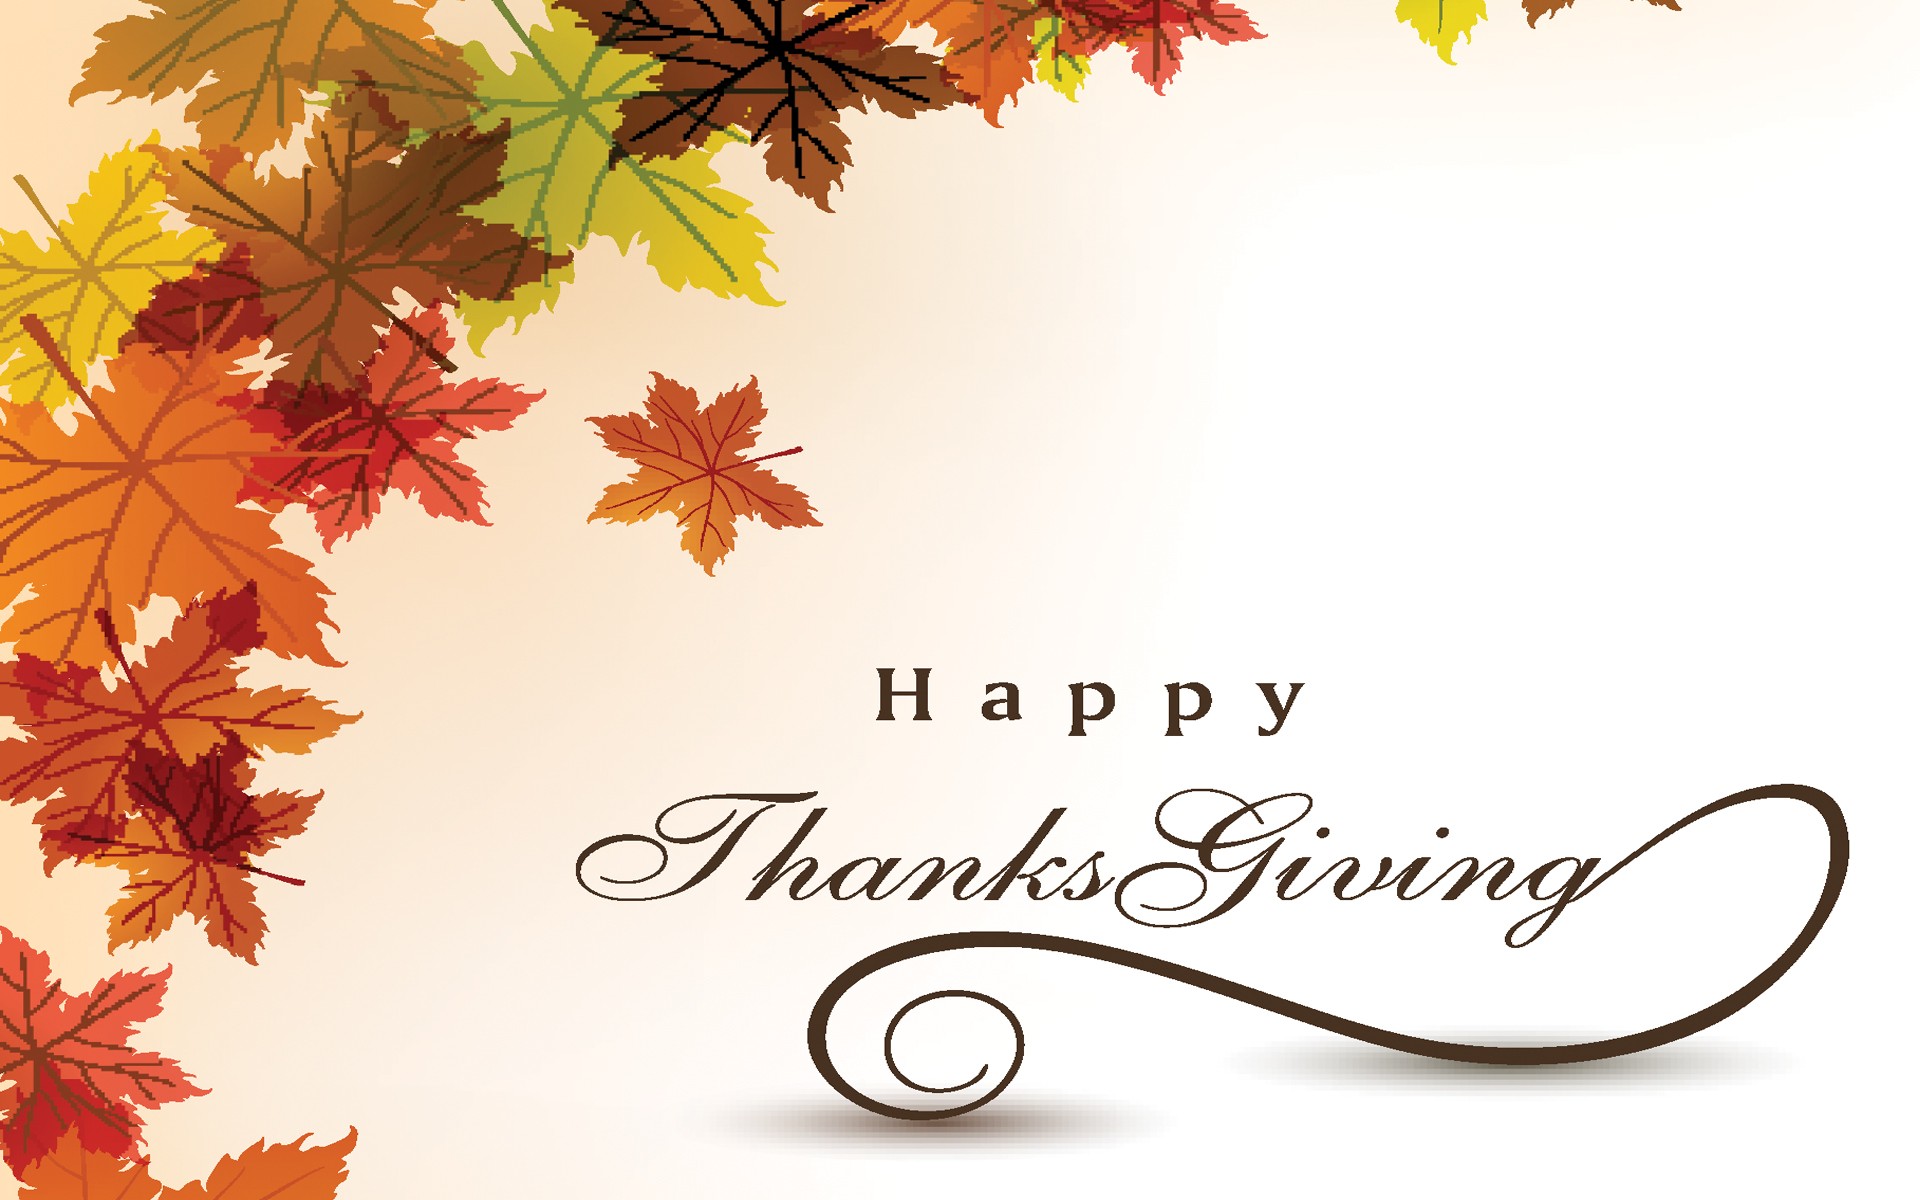 Thanksgiving Day Quotes For Family And Friends